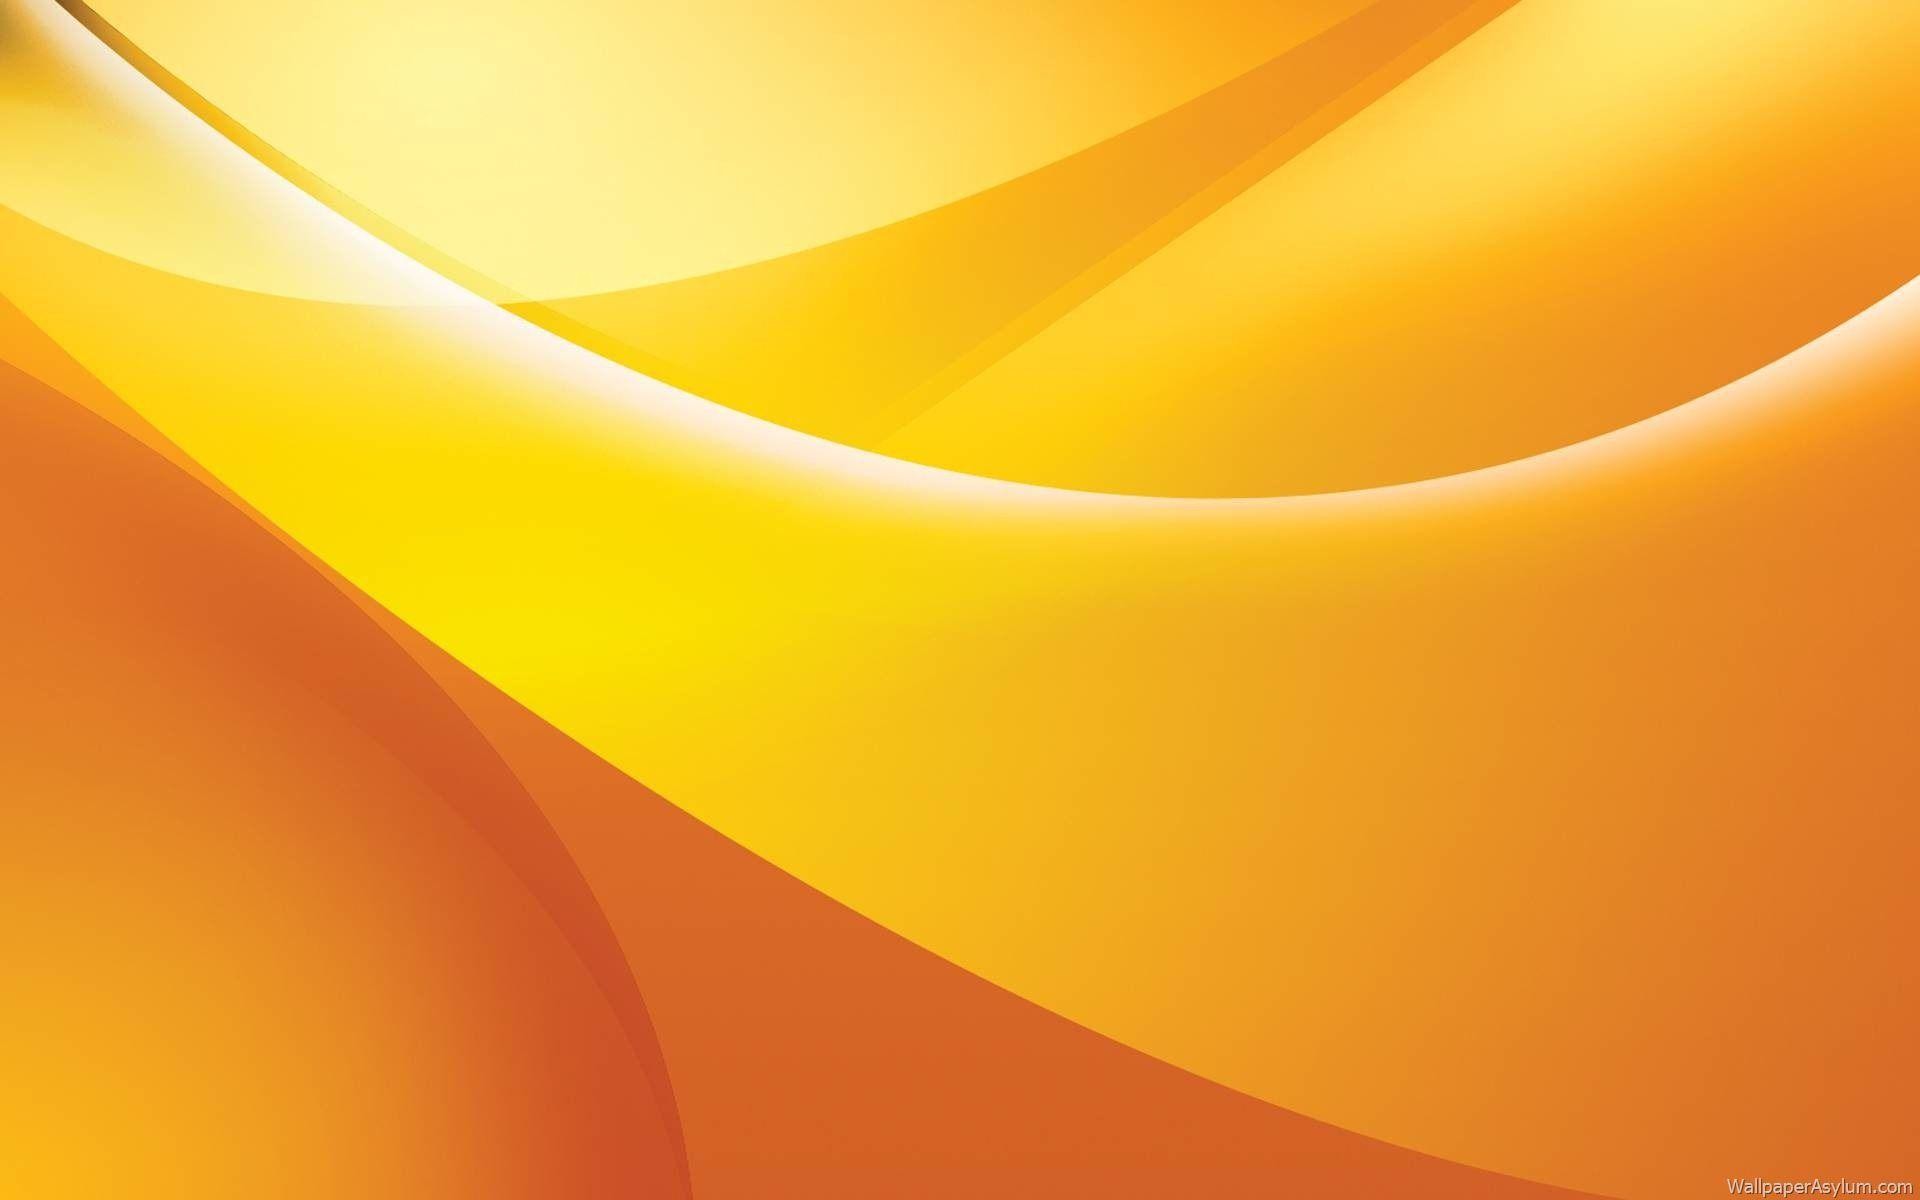 1920x1200 Most Downloaded Yellow Abstract Wallpapers - Full HD wallpaper search